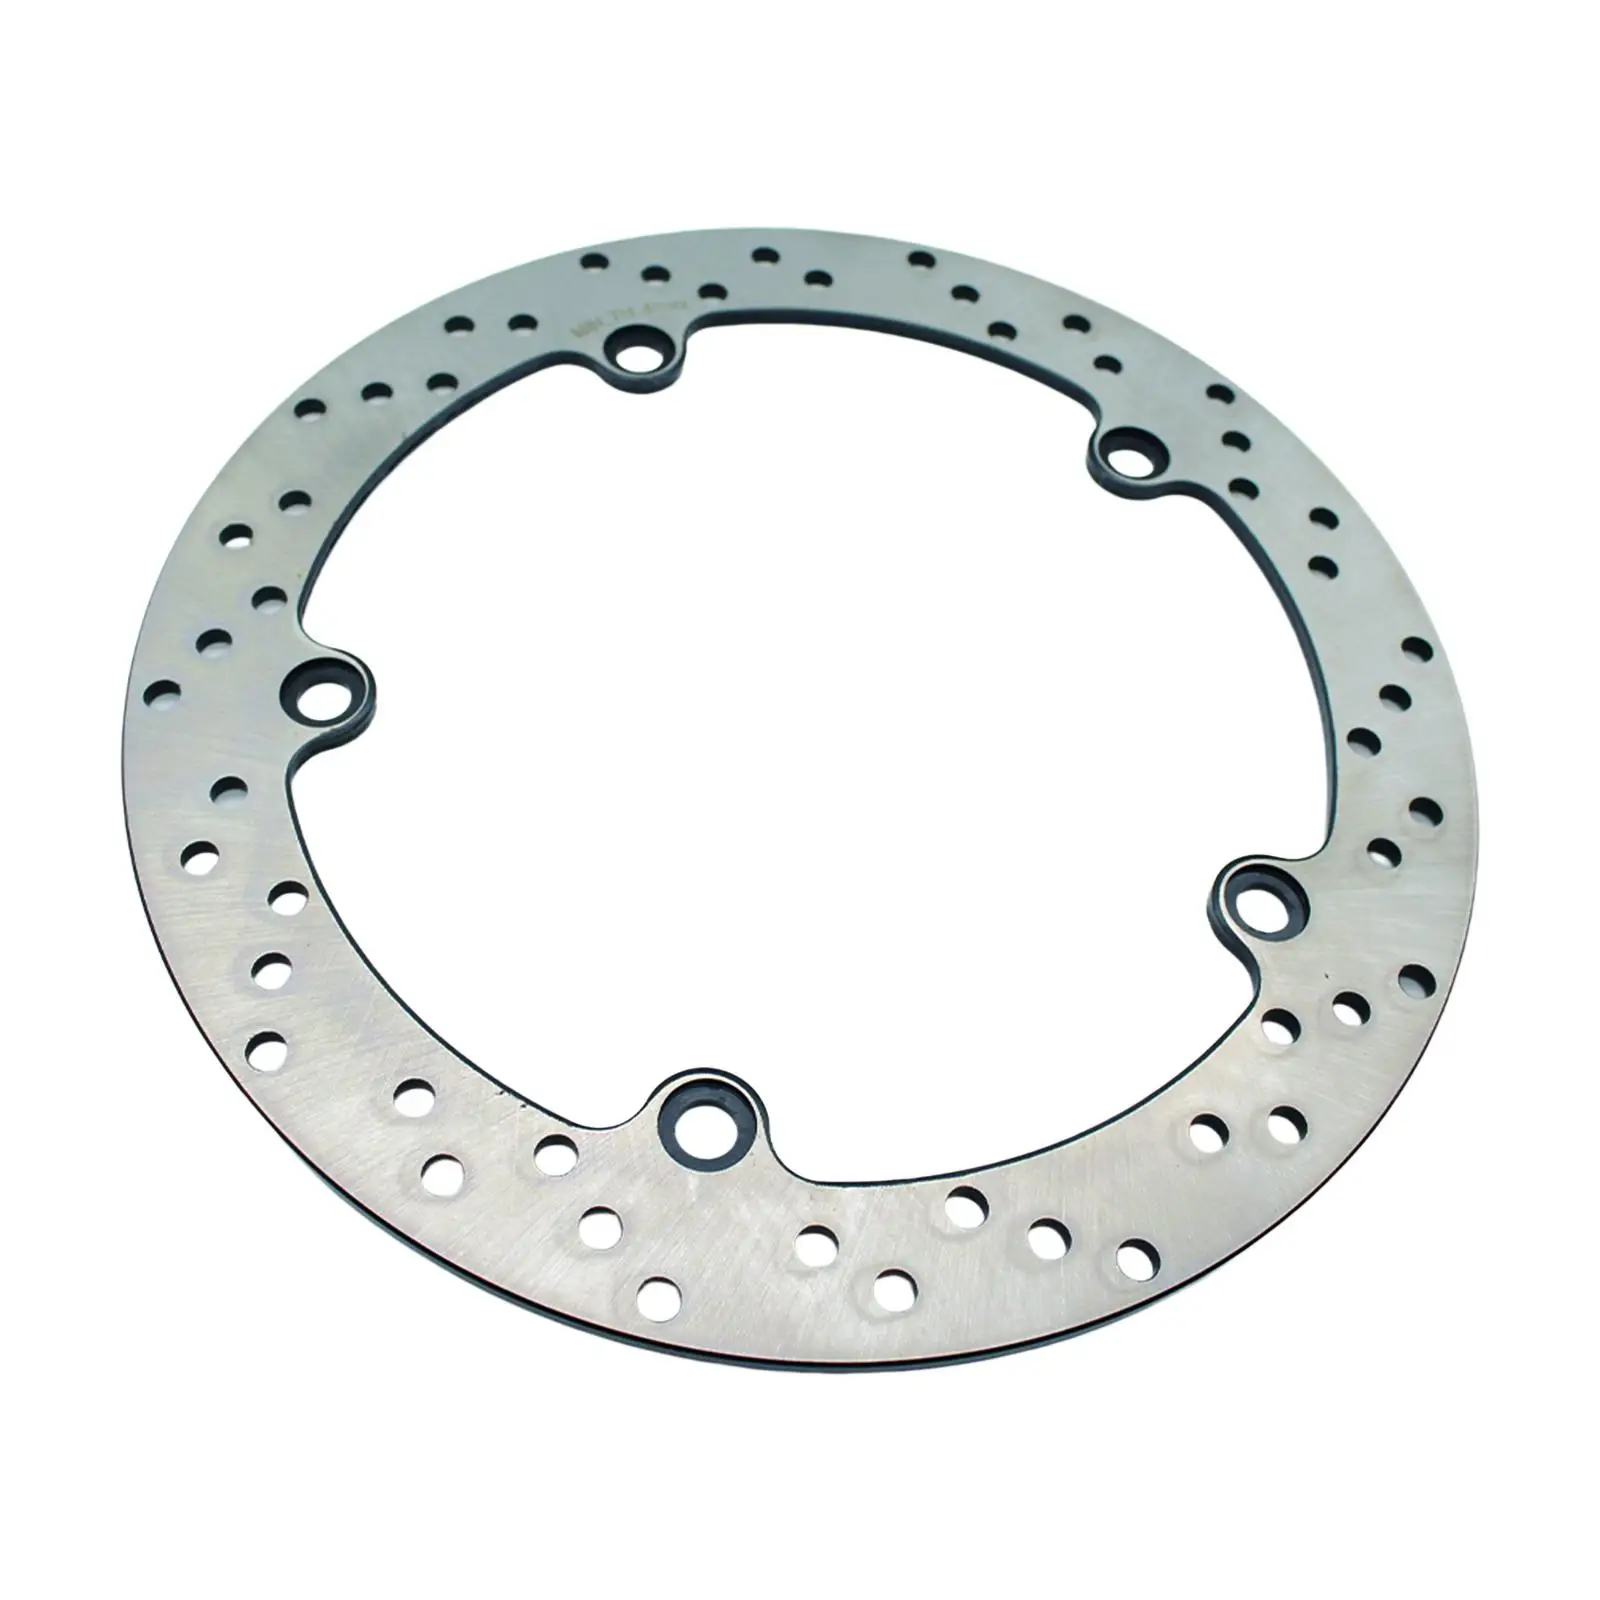 Motorcycle Rear Brake Disc for BMW R1100GS R1100R Professional Direct Replaces Easy to Install